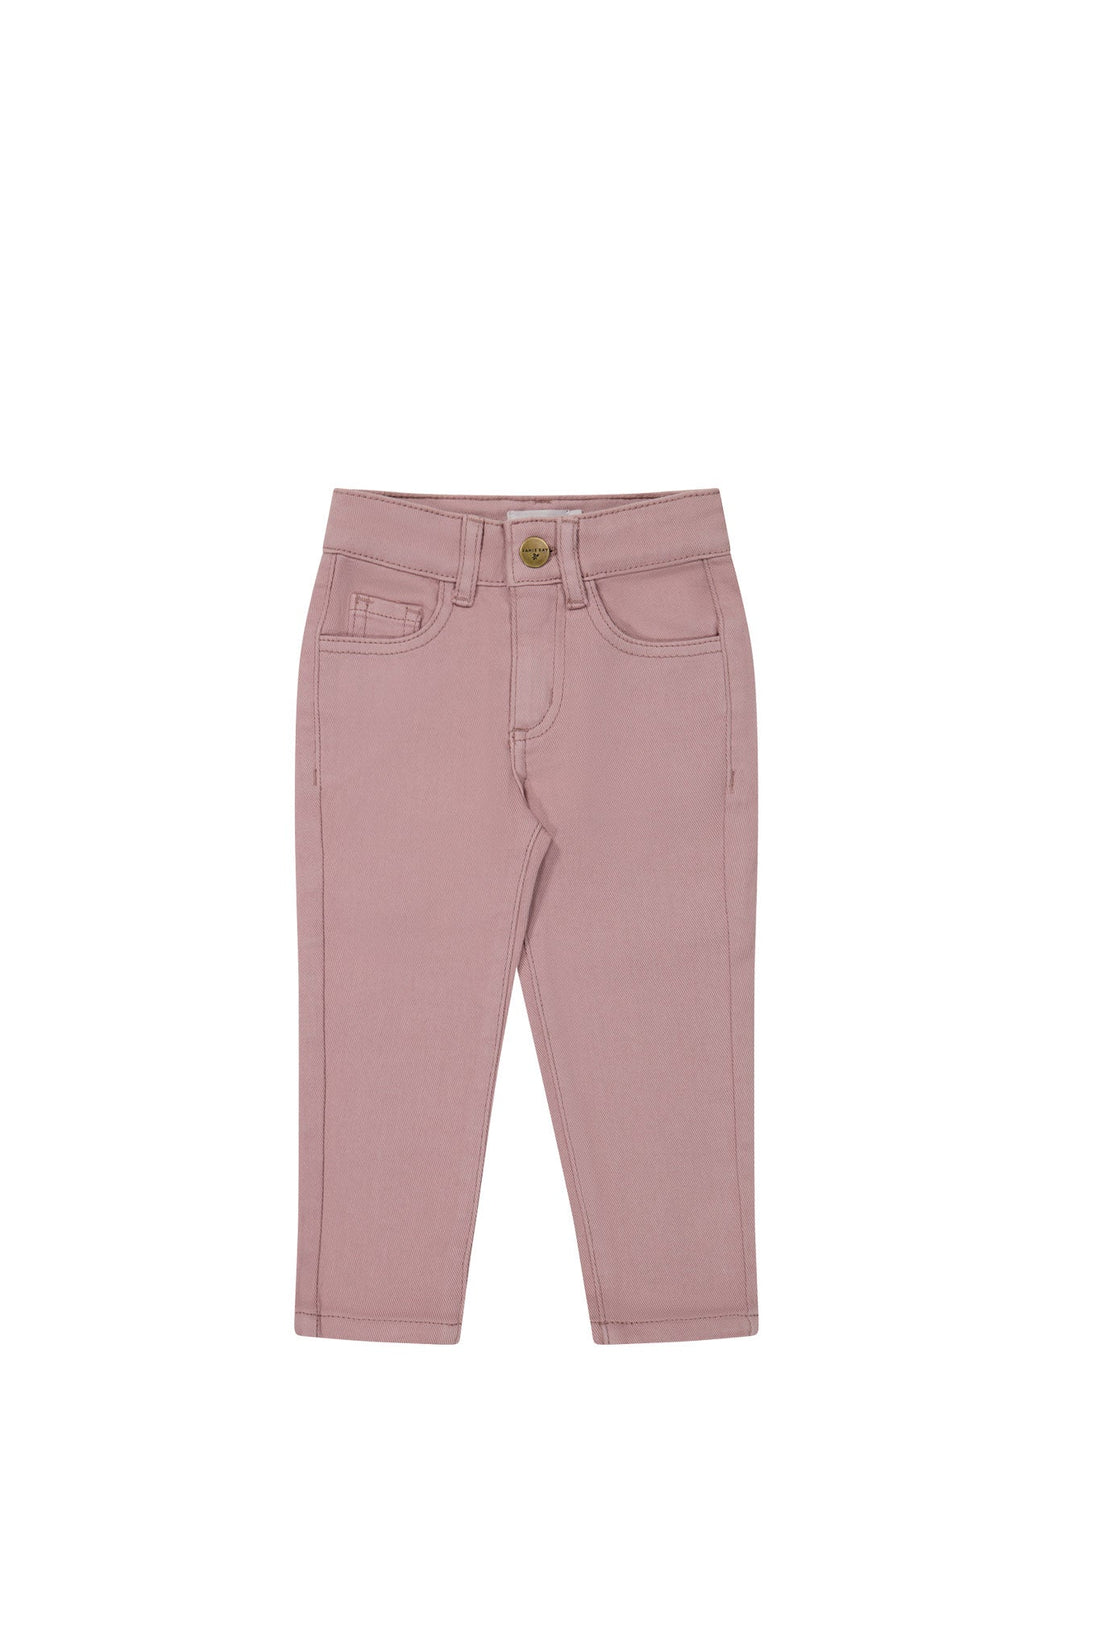 Alison Pant - Softest Mauve Childrens Pant from Jamie Kay USA